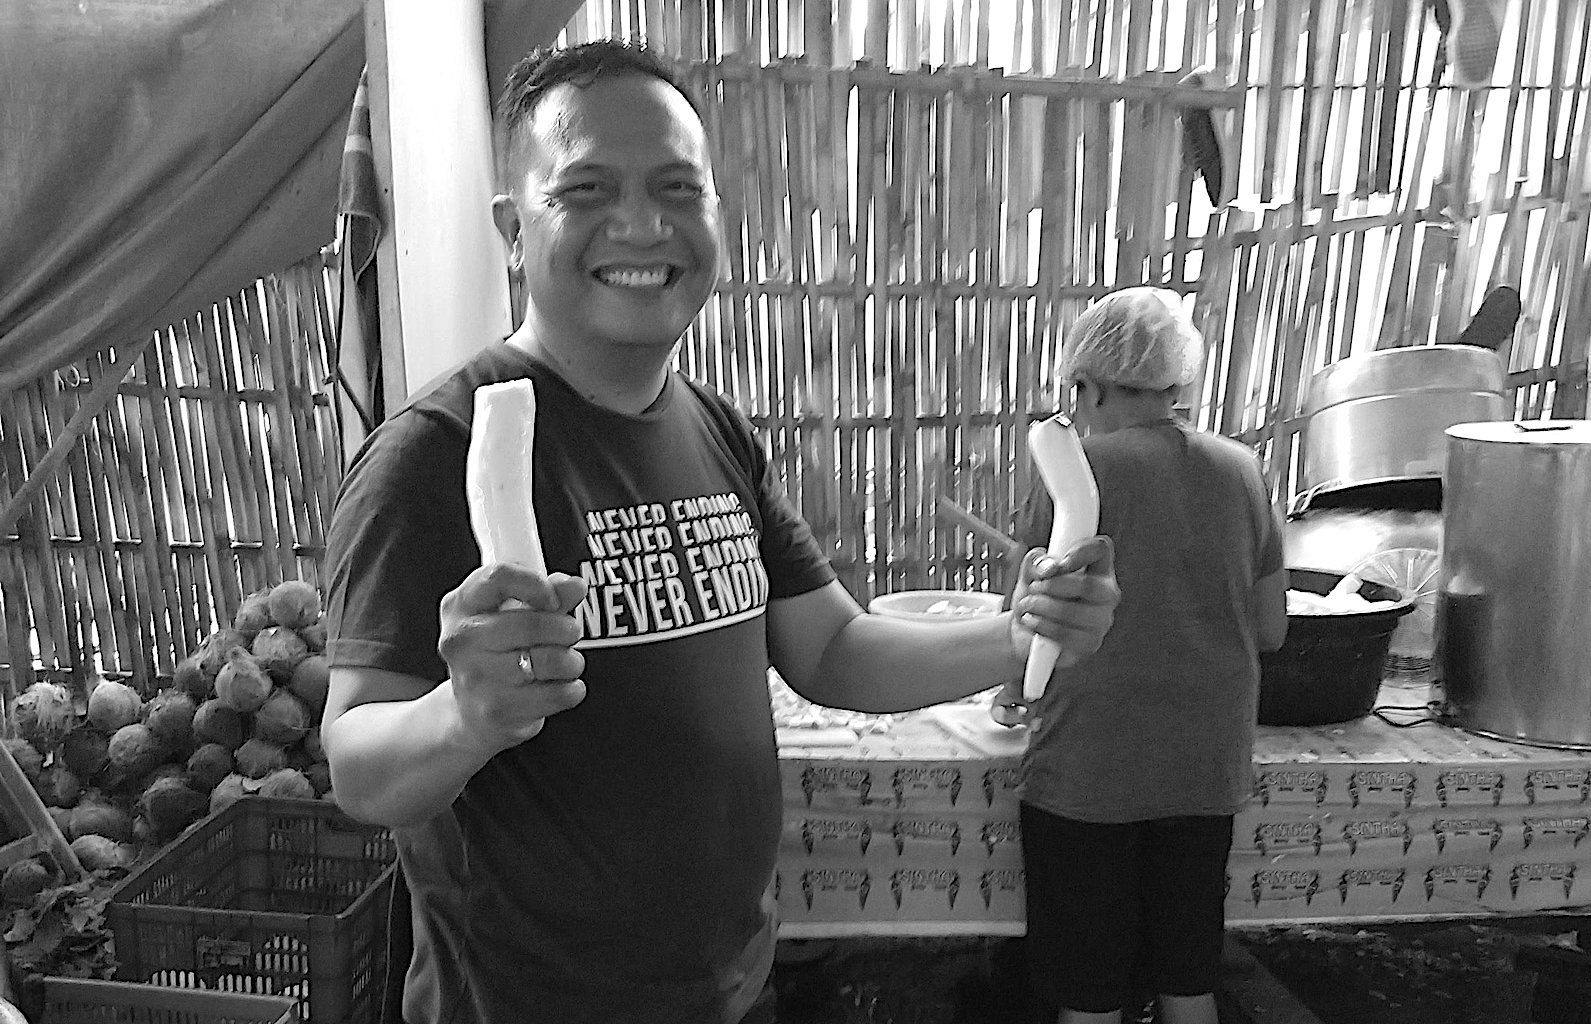 Meet Mona who is changing his Jakarta community for the better